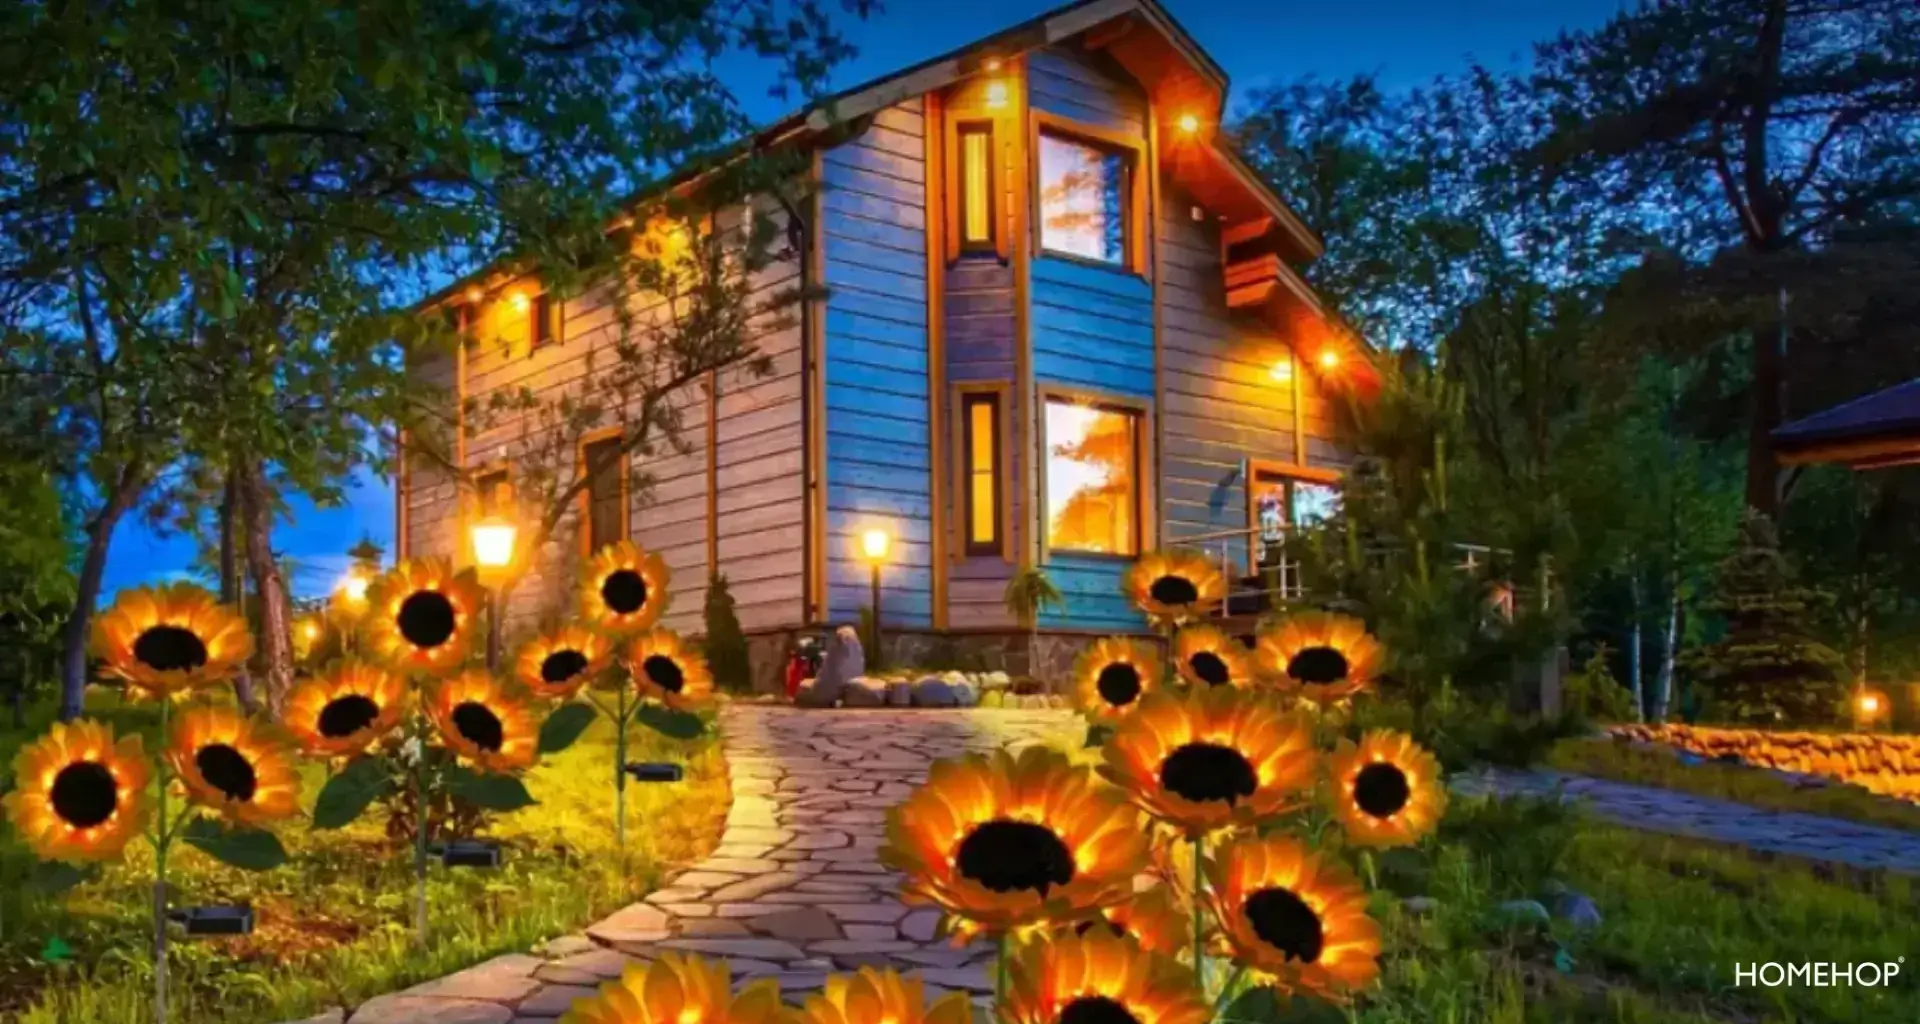 Solar light decoration ideas for home and outdoor